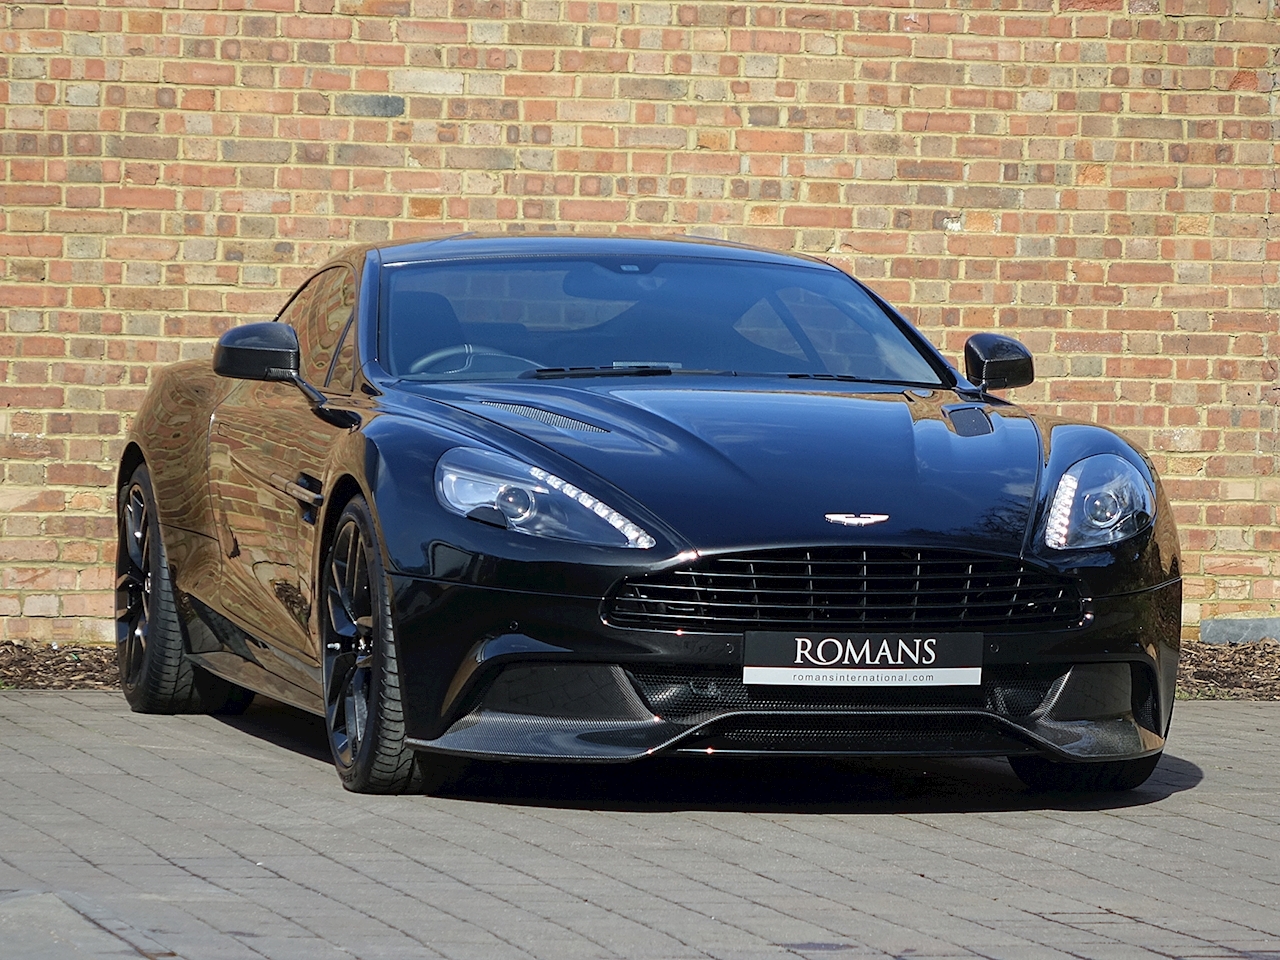 Elegance And Power: The Aston Martin Vanquish Carbon Edition